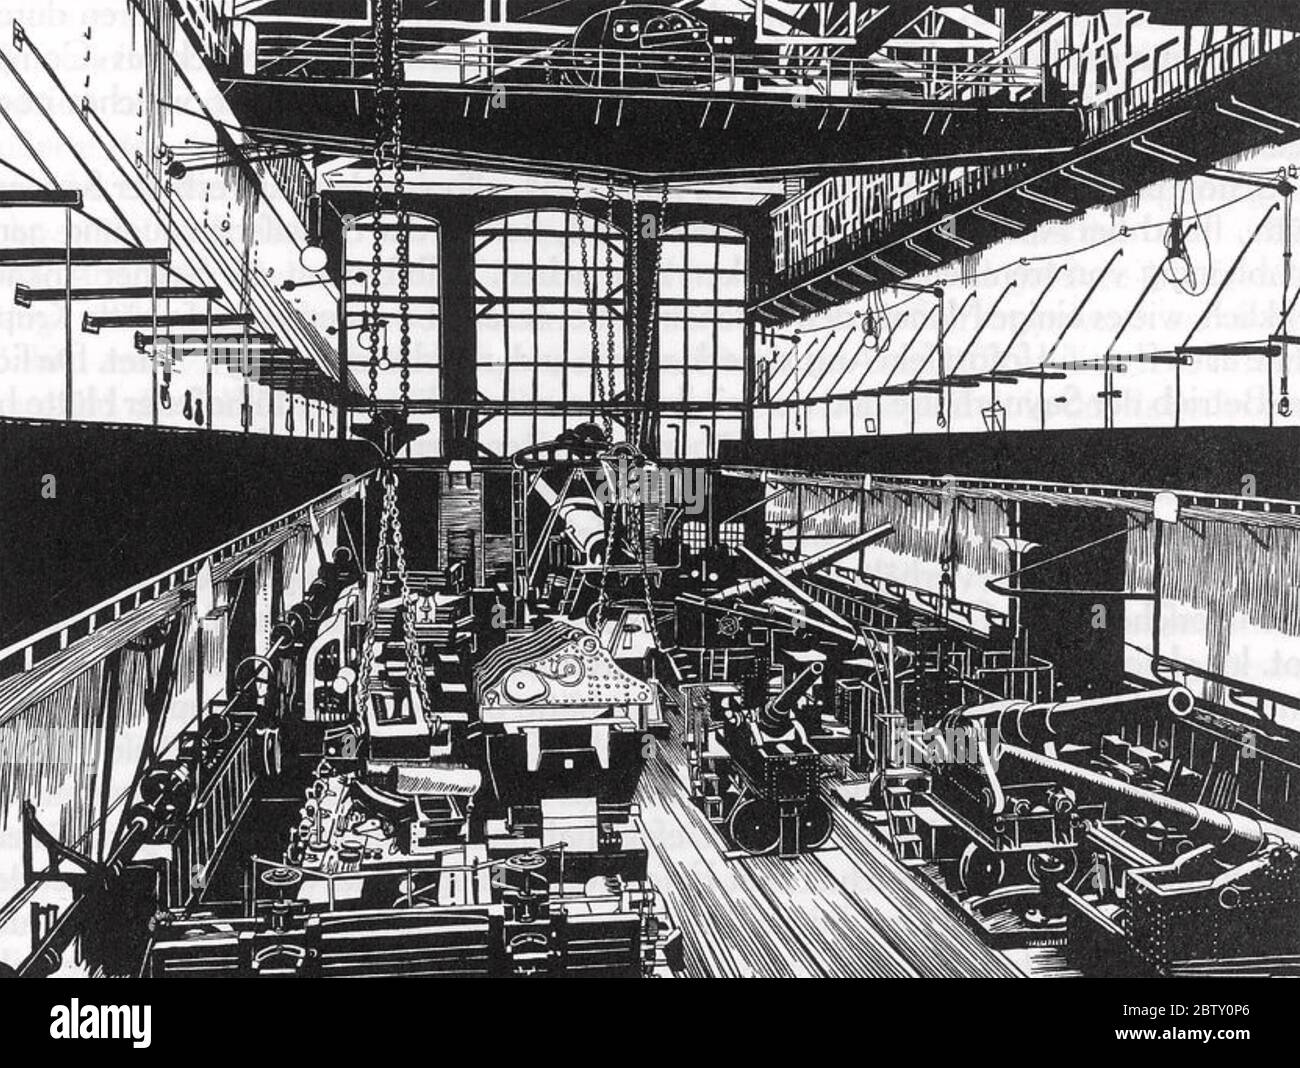 Krupp Factory Essen High Resolution Stock Photography And Images Alamy